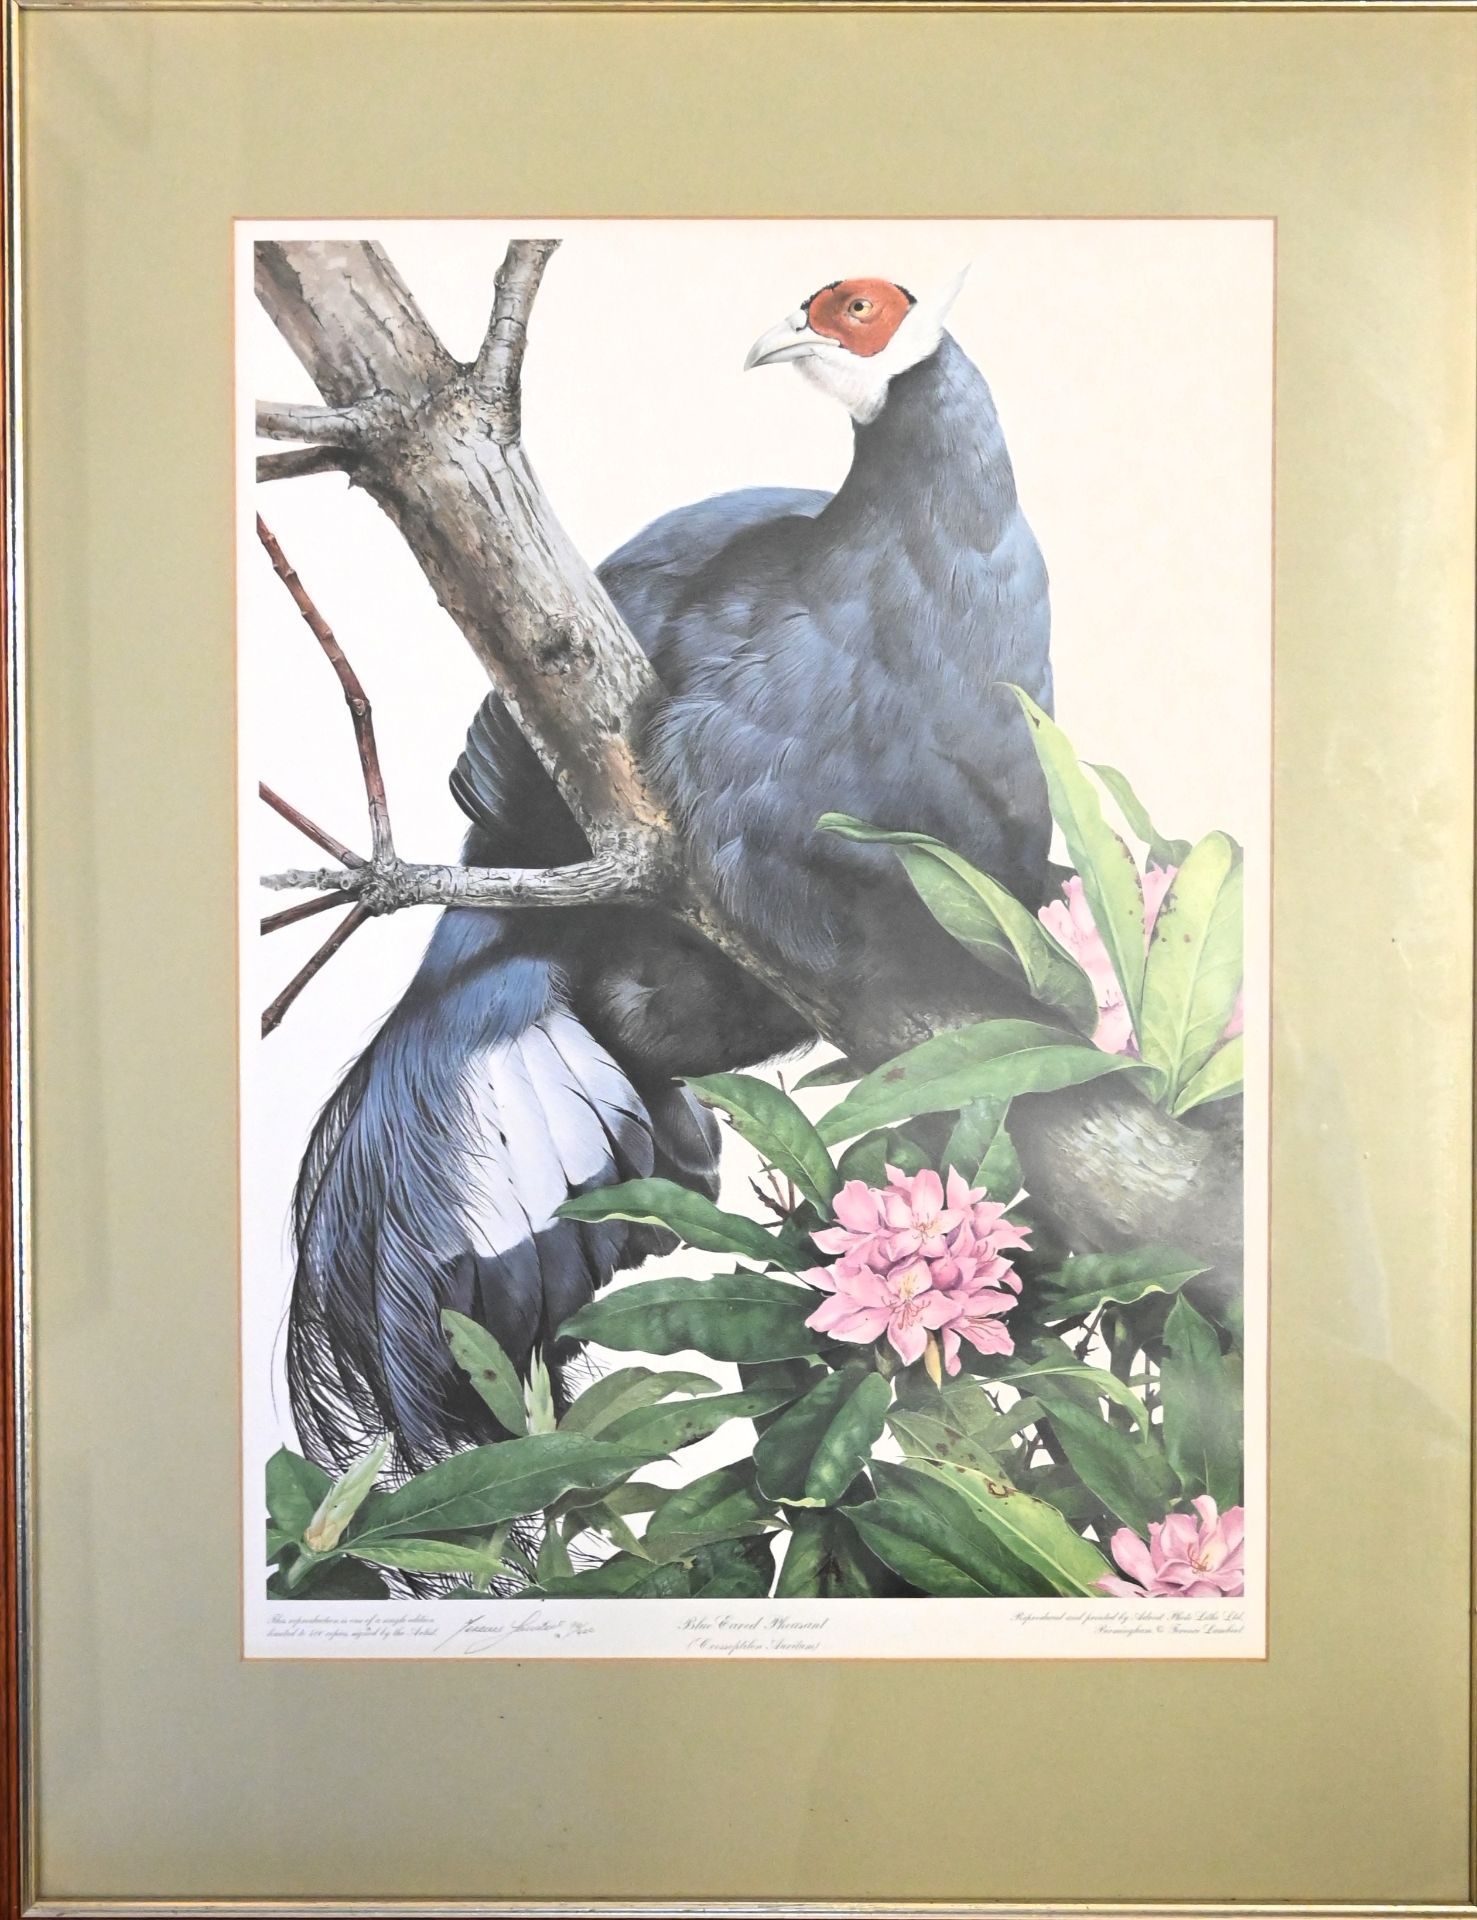 Terence Lambert limited lithographic print study of a blue eared pheasant, signed in pencil - Image 2 of 2